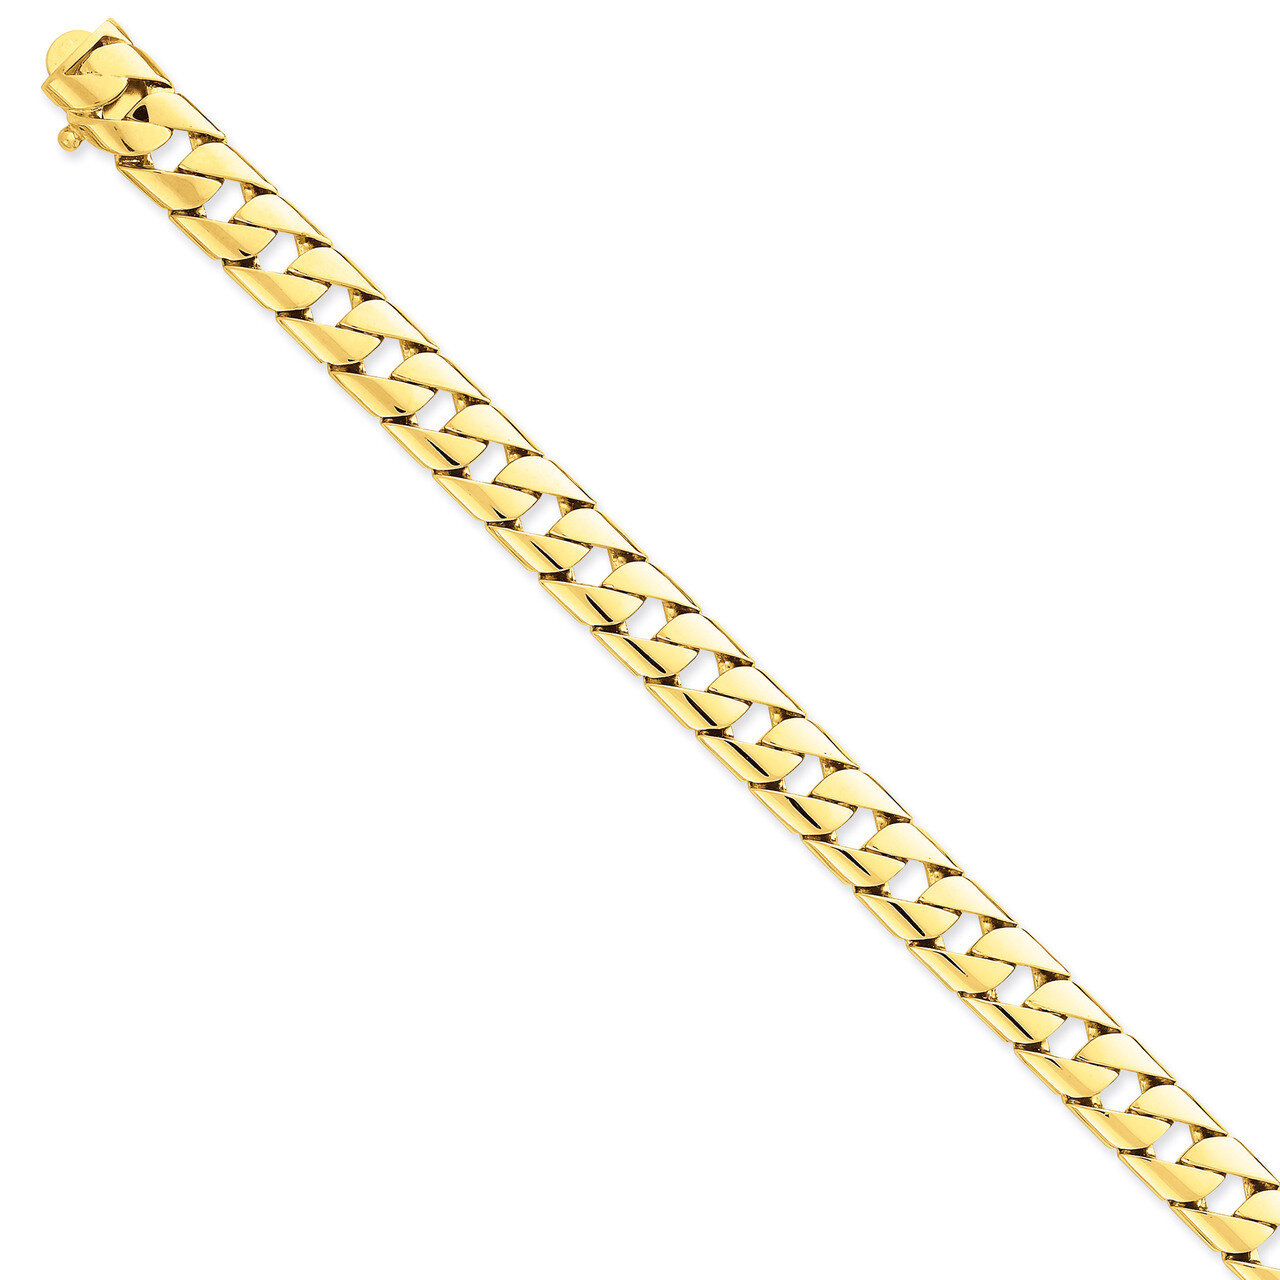 10mm Hand-polished Link Chain 20 Inch 14k Gold LK141-20